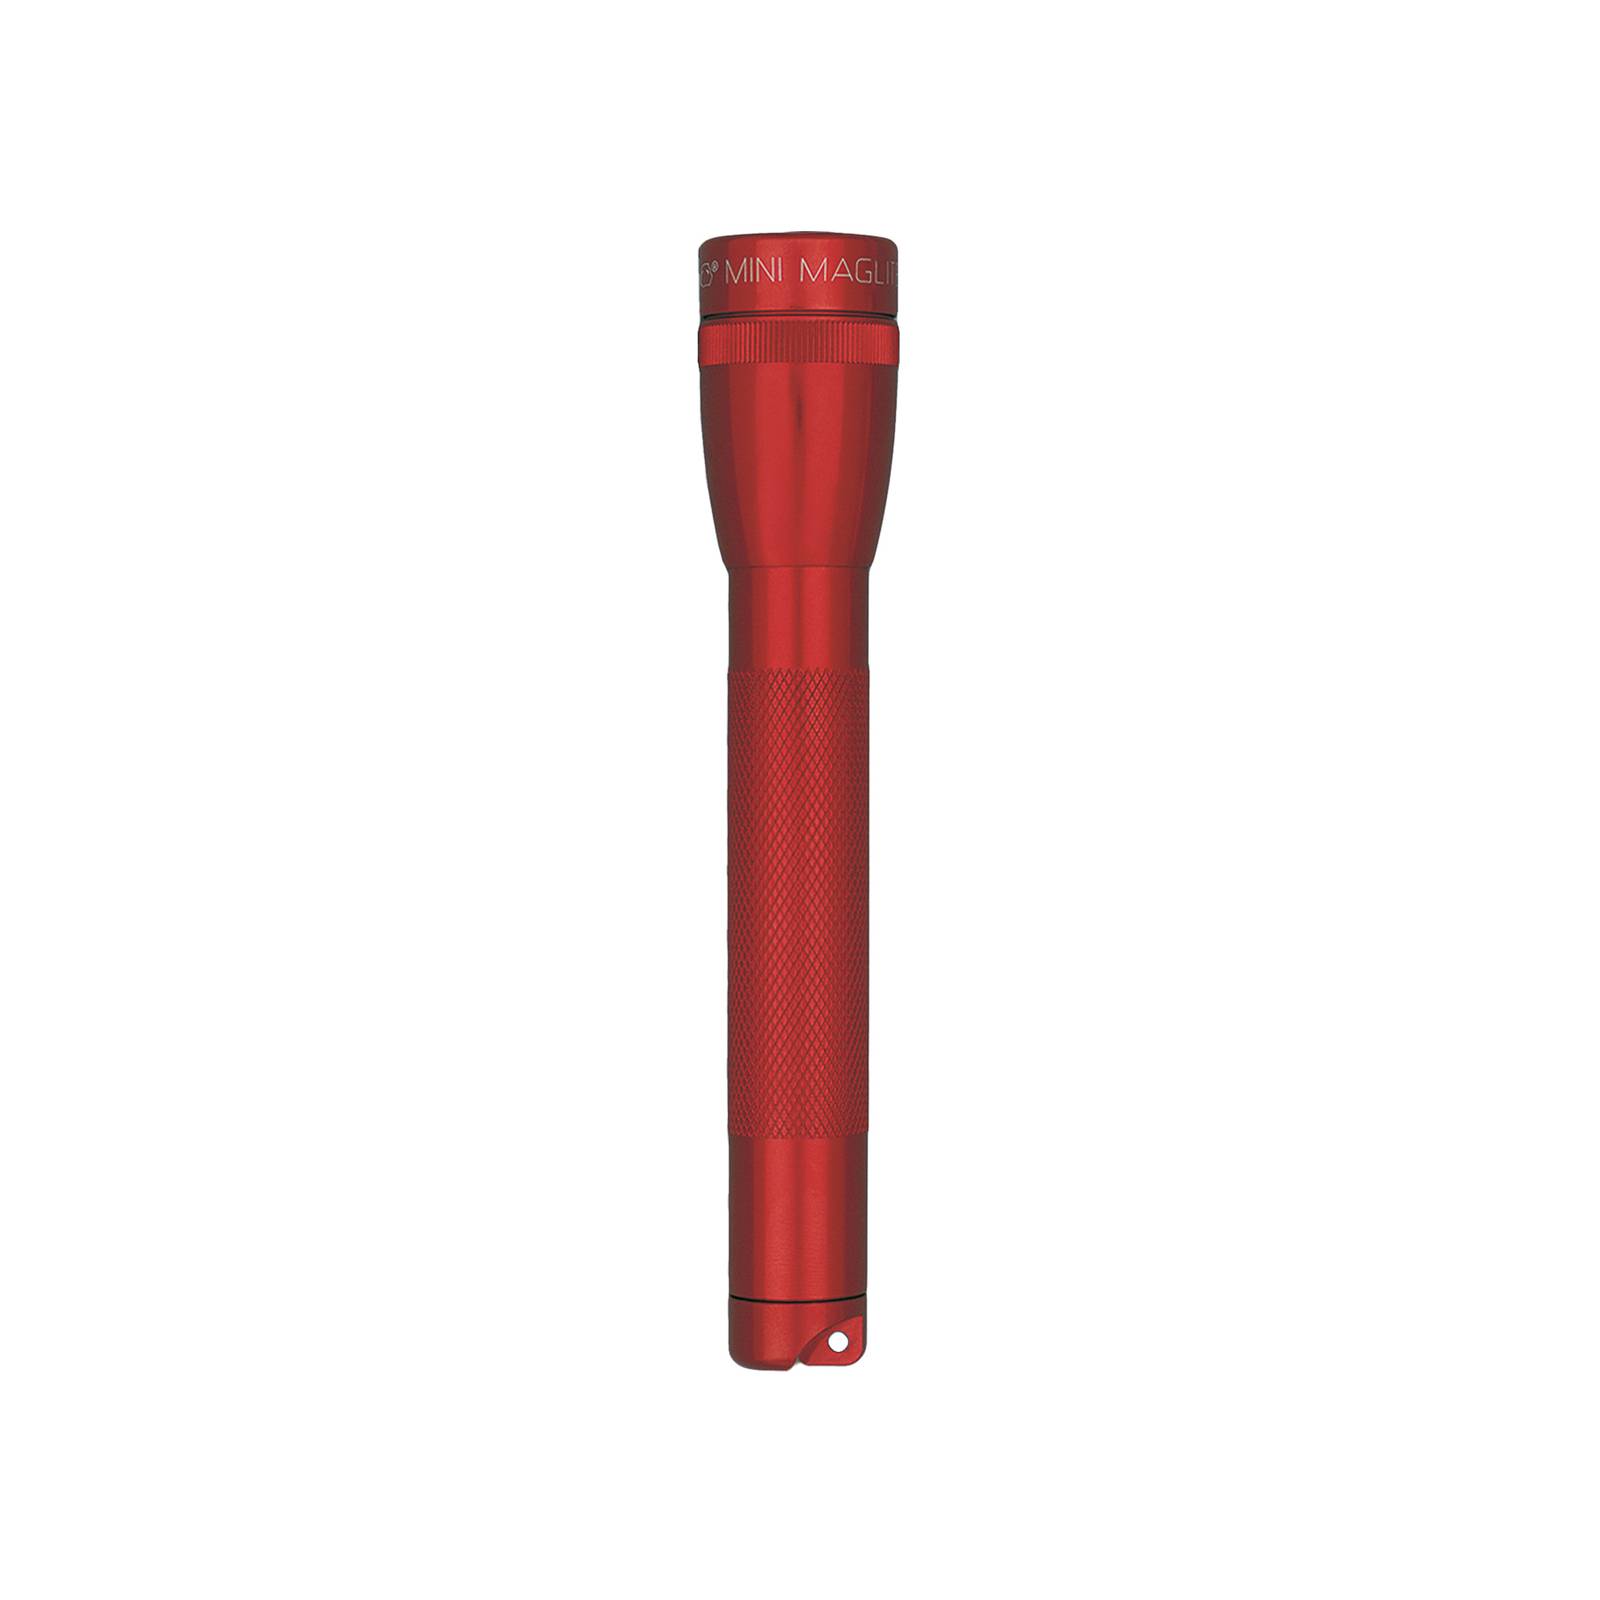 Maglite Xenon-Taschenlampe Mini, 2-Cell AA, Holster, rot